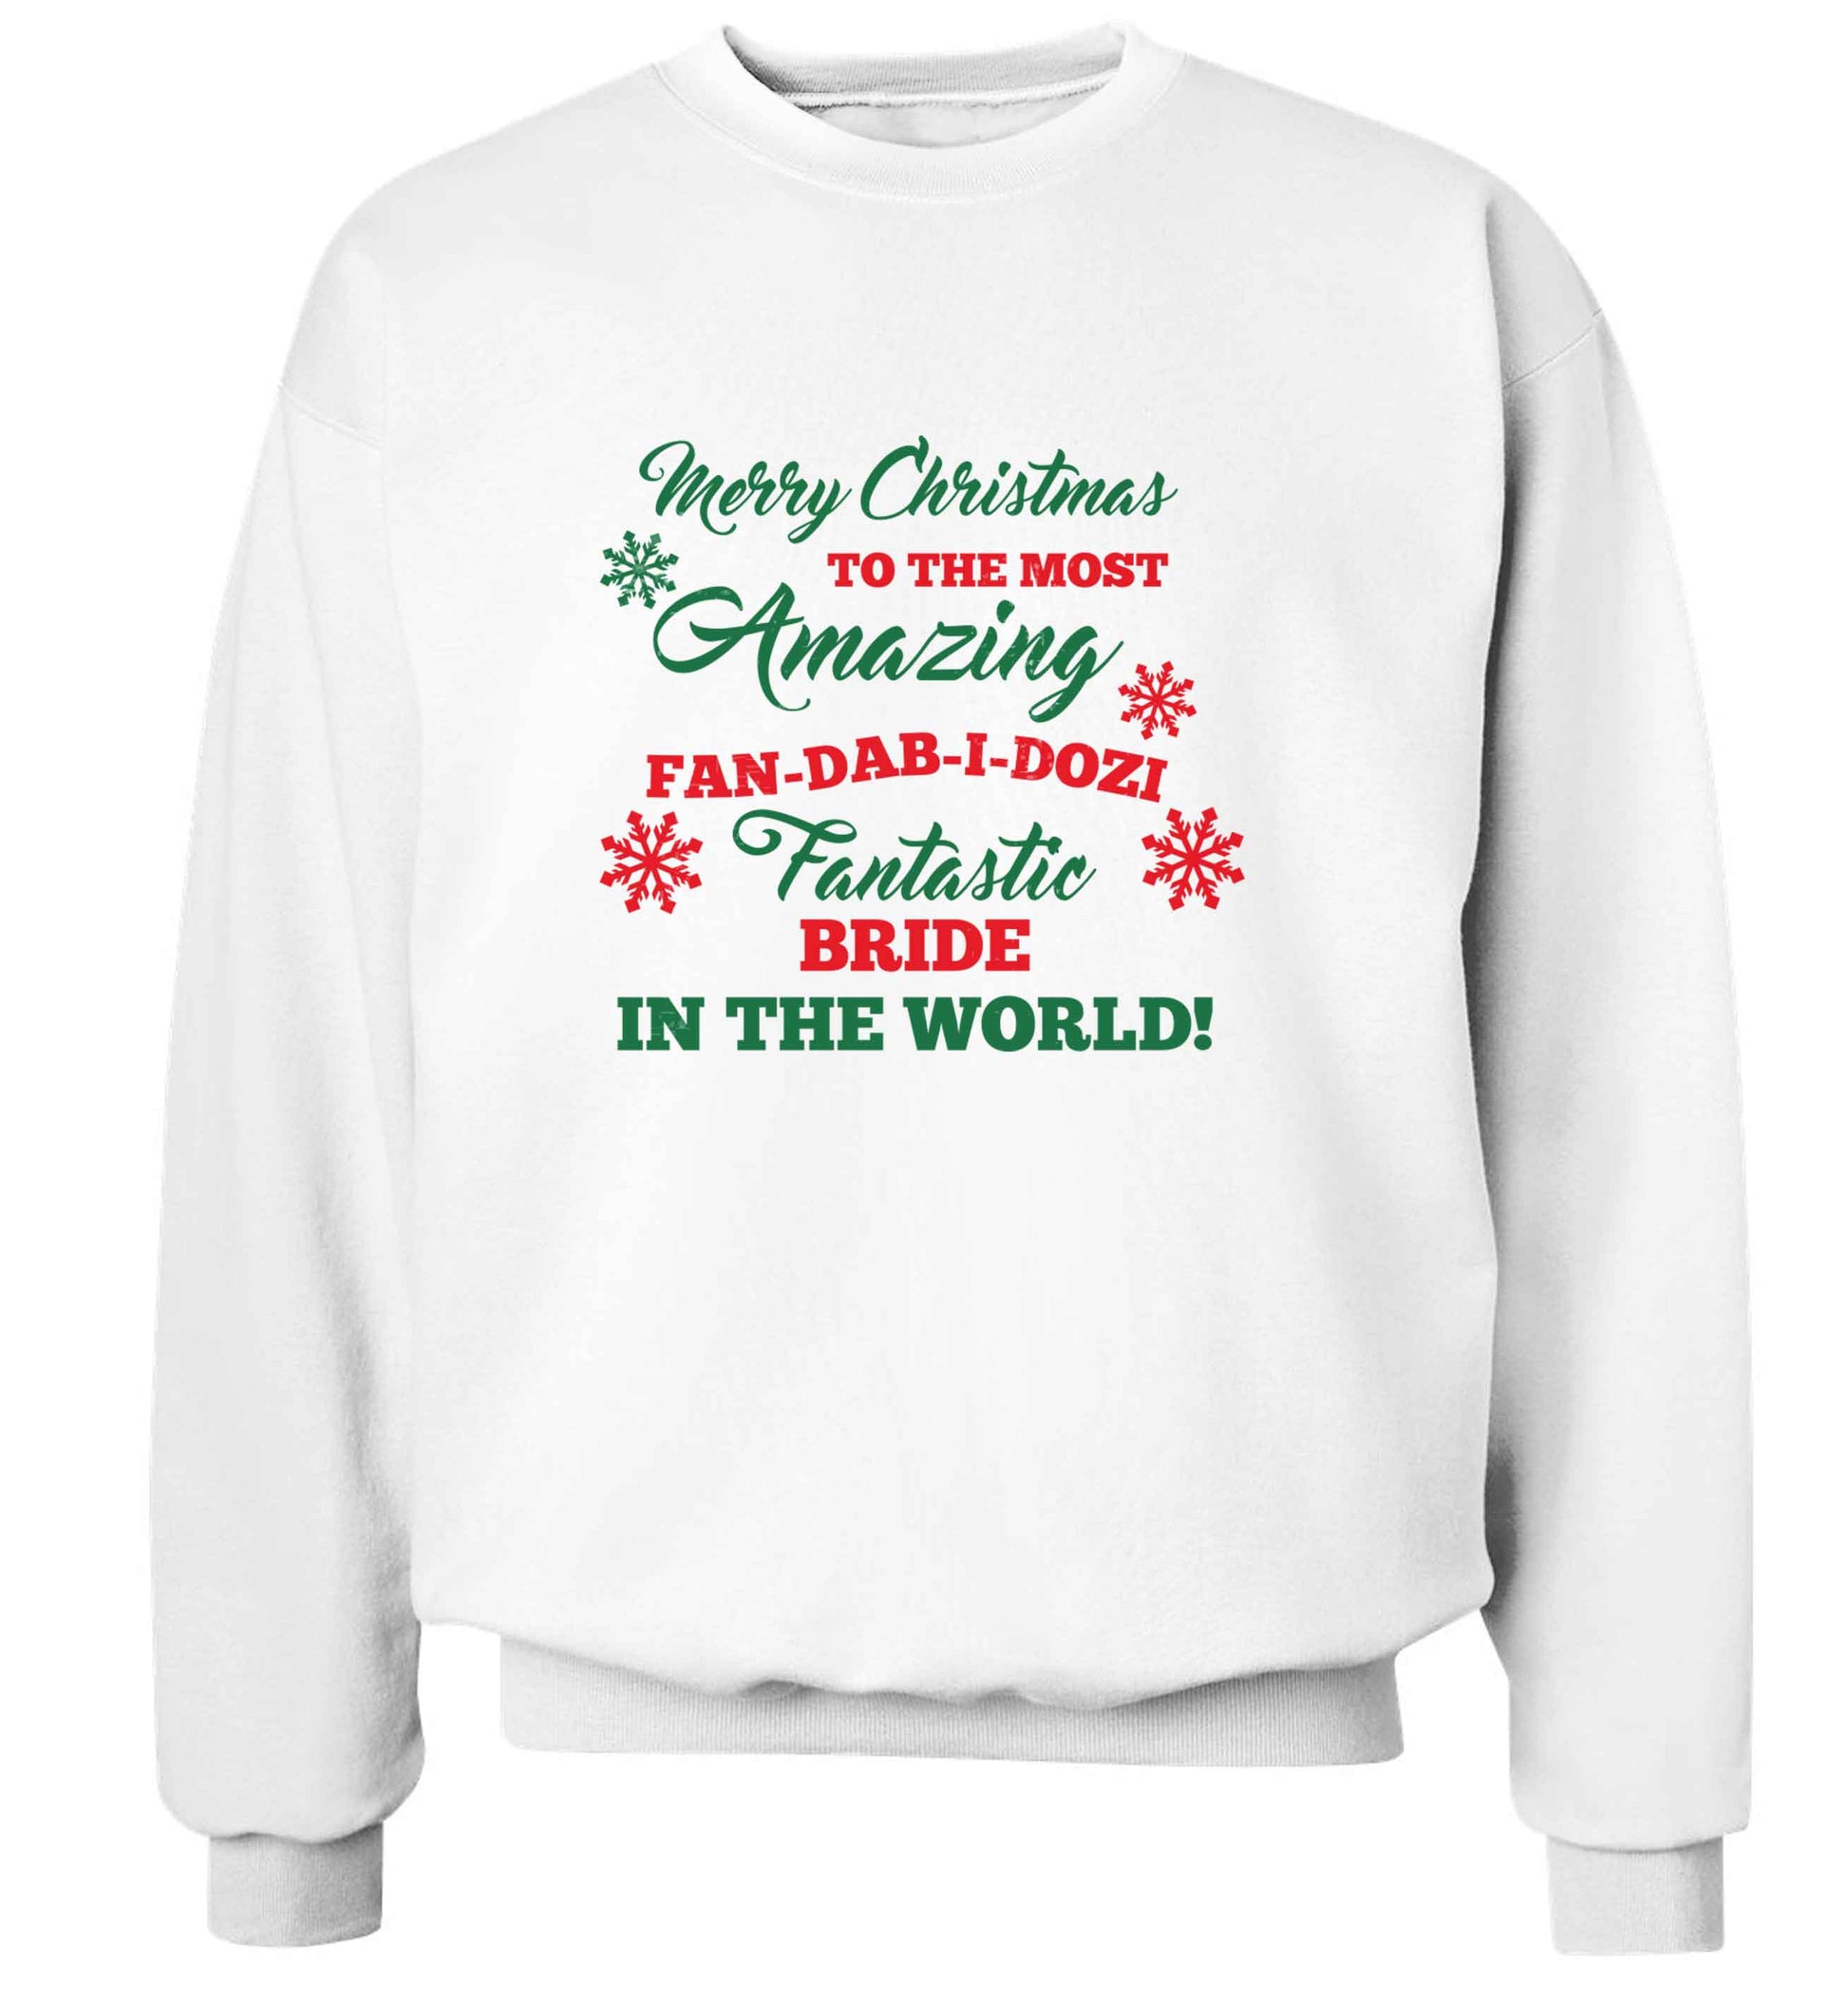 Merry Christmas to the most amazing bride in the world! adult's unisex white sweater 2XL